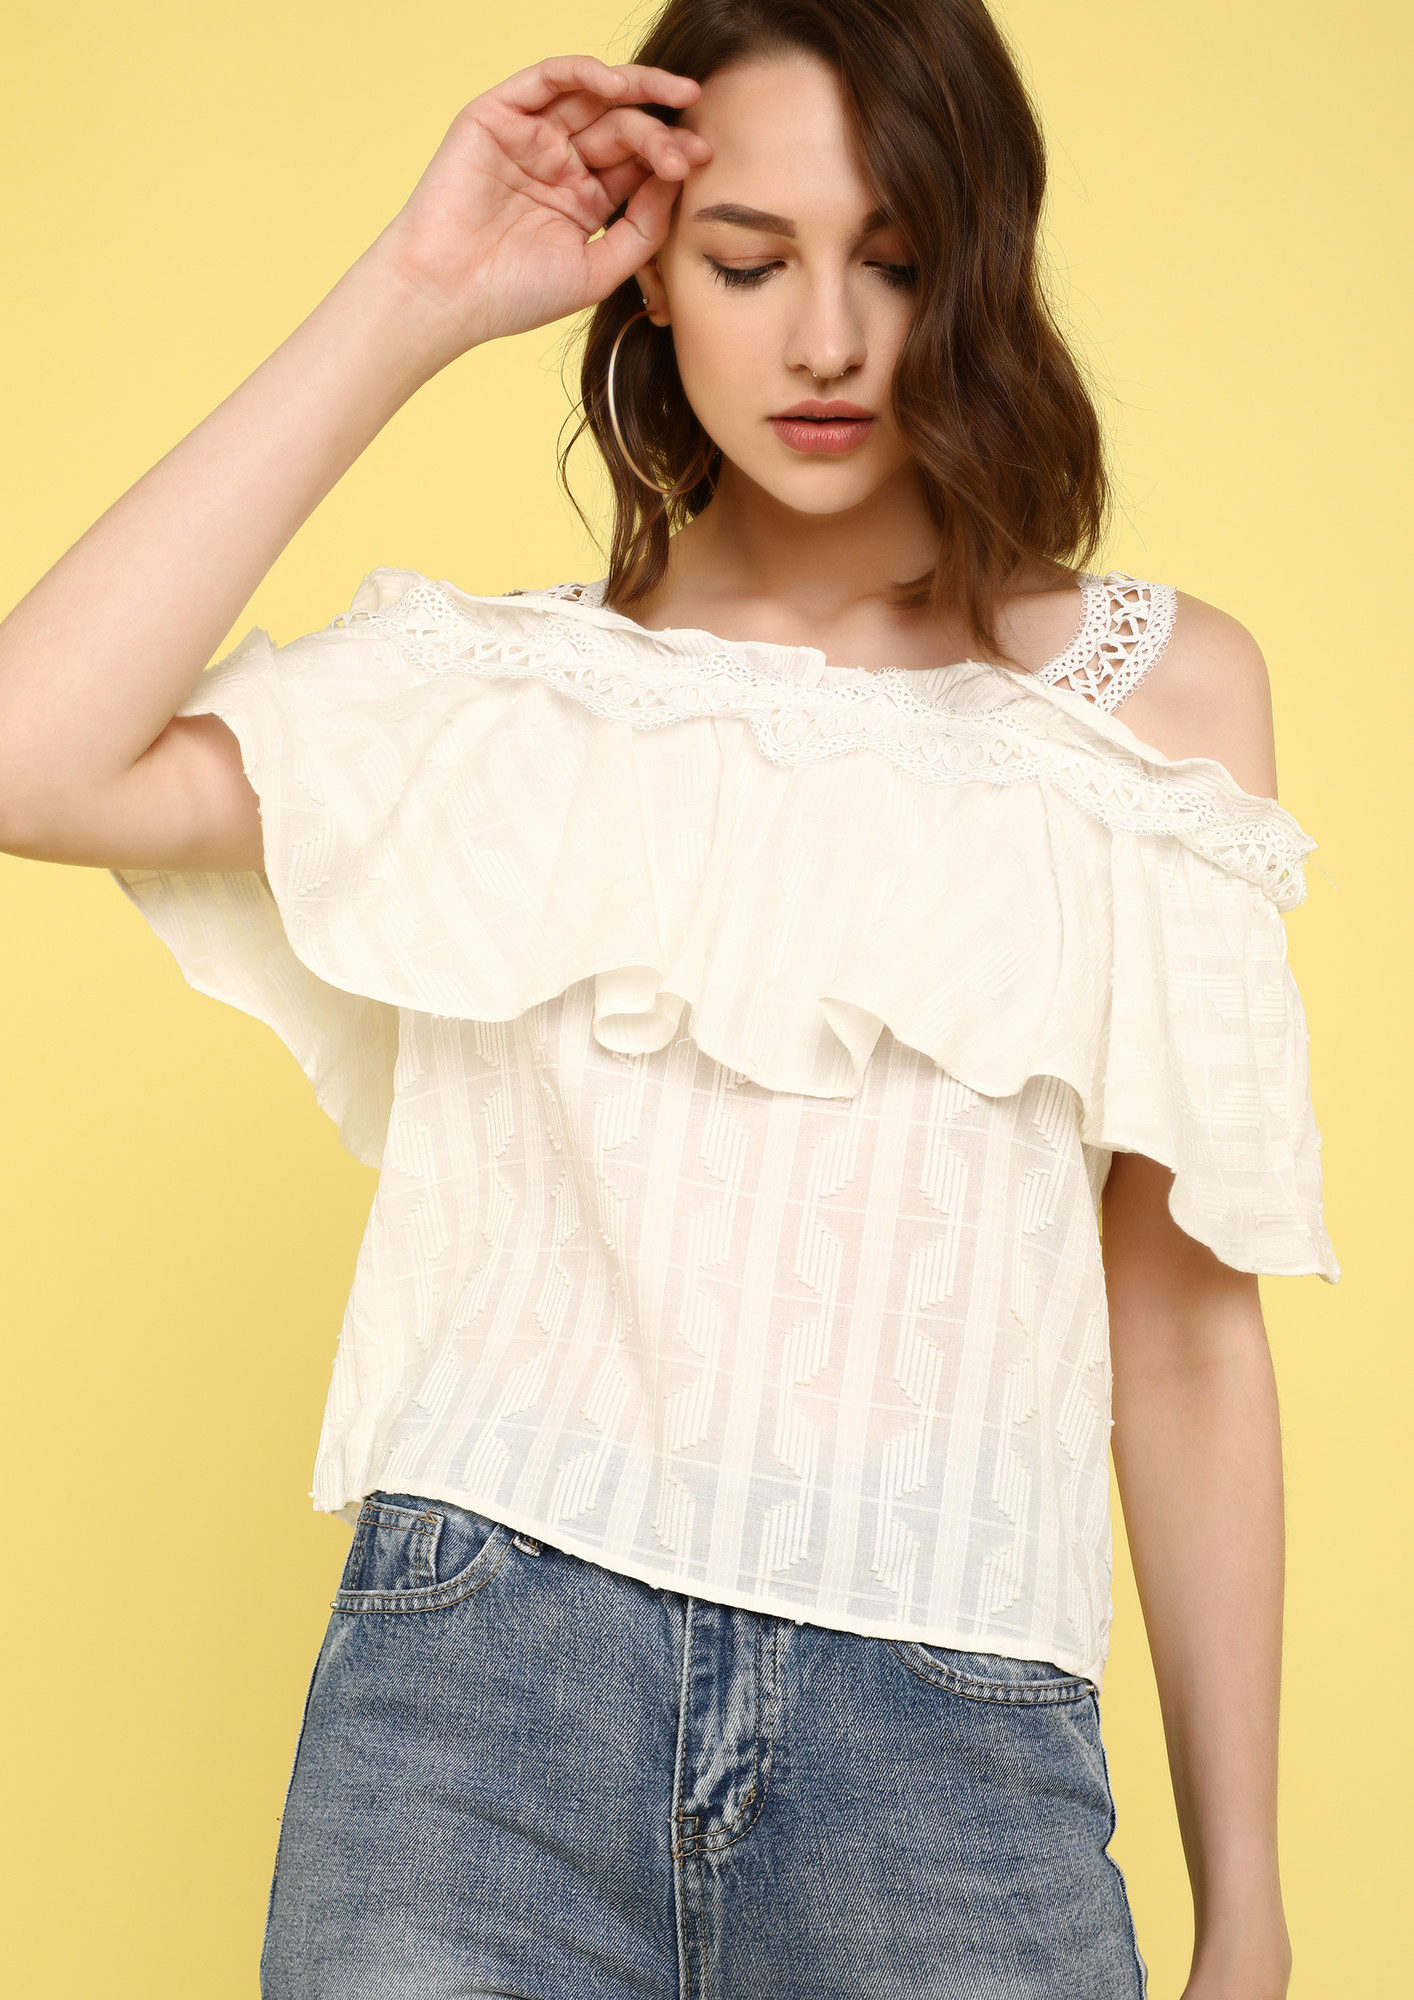 LACY SUNDAY'S COLD-SHOULDER TOP